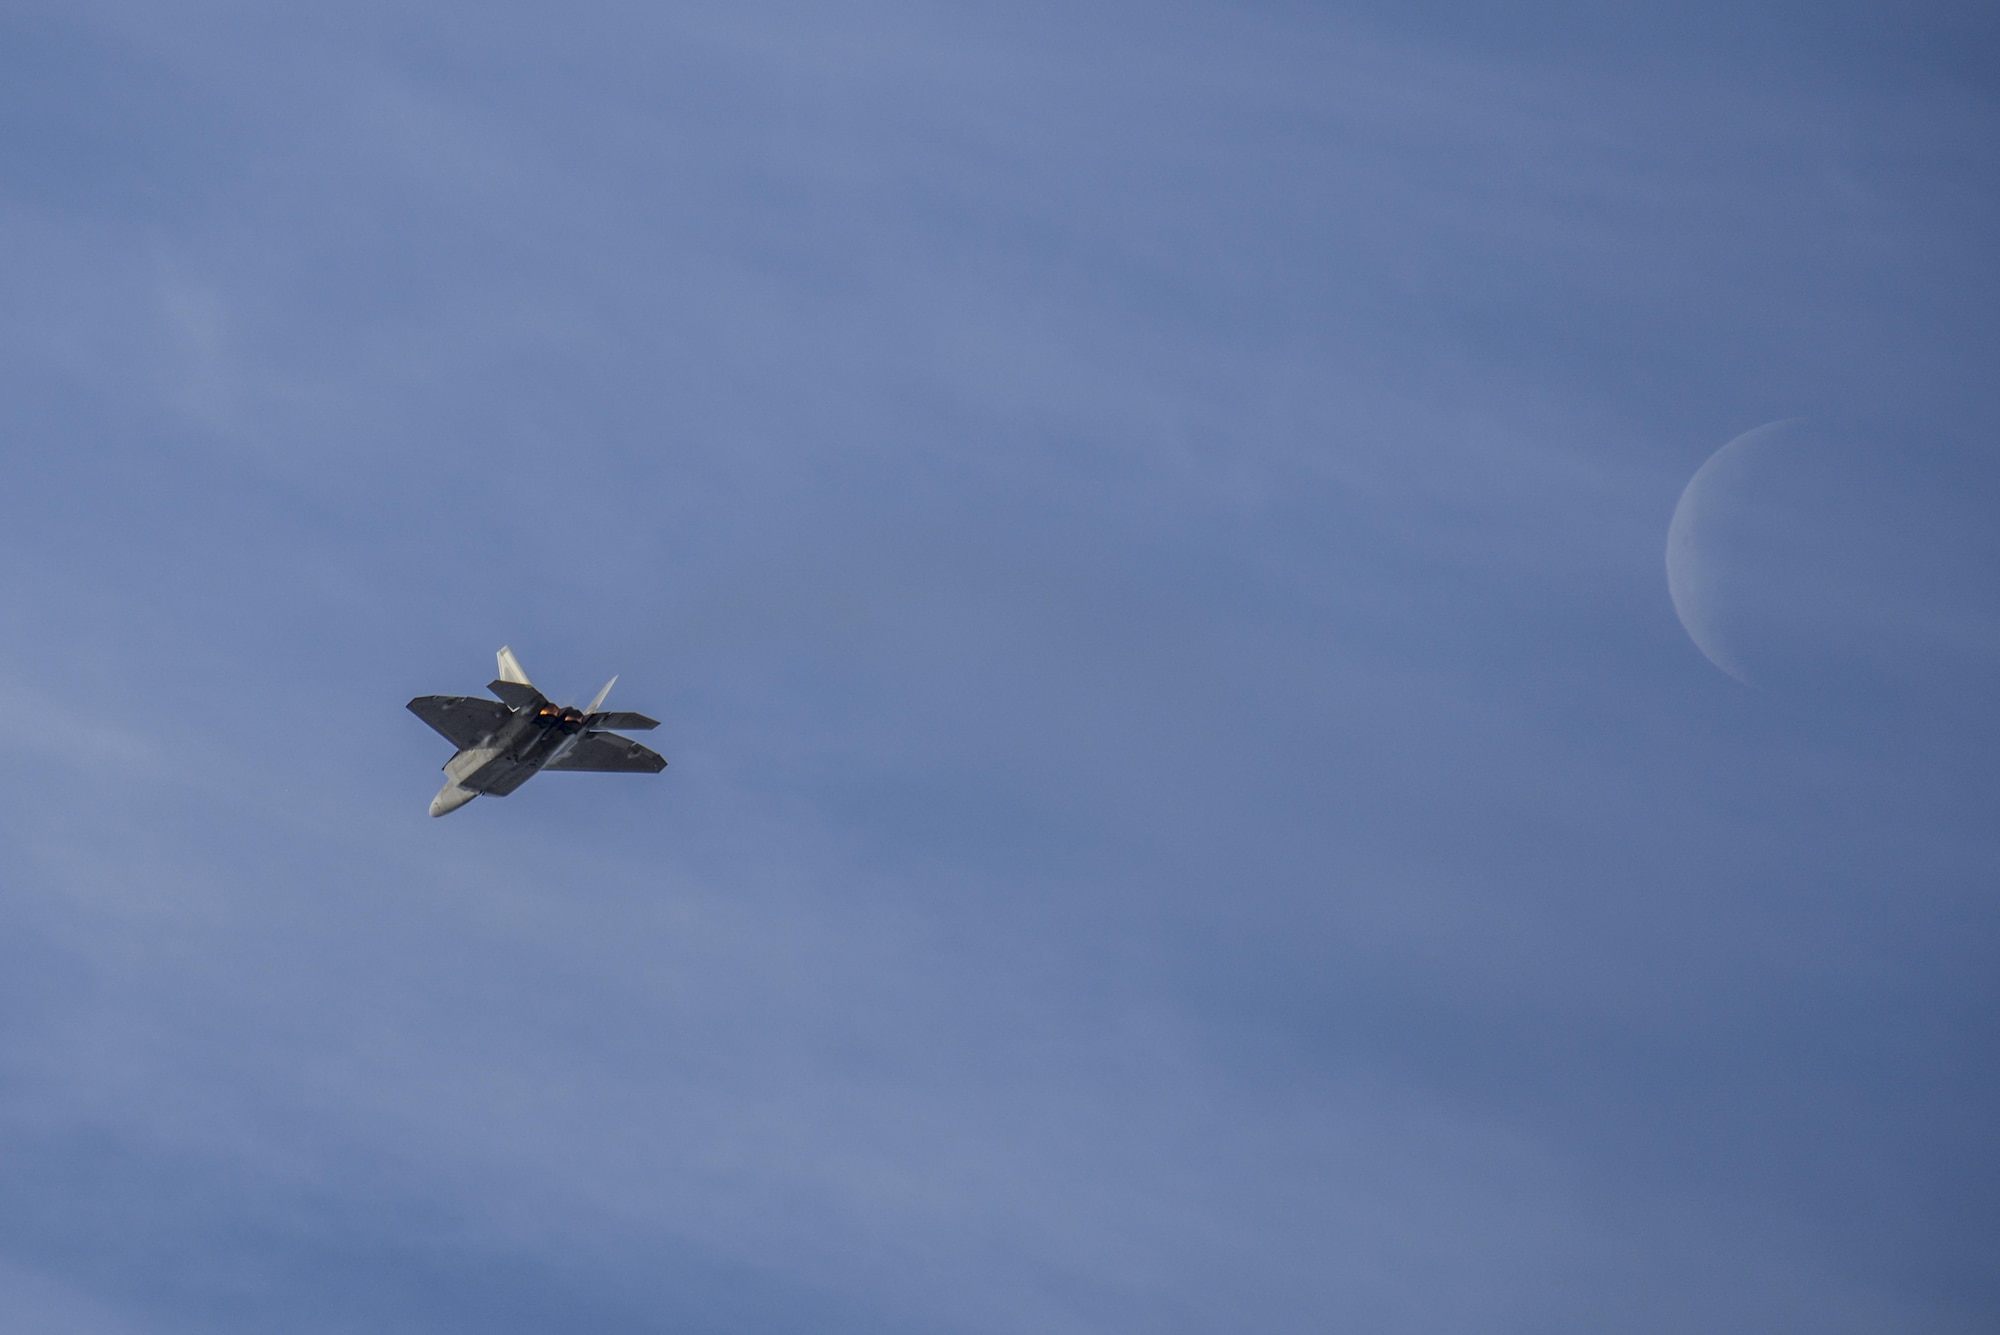 A U.S. Air Force F-22 Raptor flies in the foreground of the moon during the 2016 Heritage Flight Training and Certification Course at Davis-Monthan Air Force Base, Ariz., March 4, 2016. The annual aerial demonstration training event has been held at D-M since 2001 and features aerial demonstrations from historical and modern fighter aircraft. (U.S. Air Force photo by Senior Airman Chris Massey/Released) 